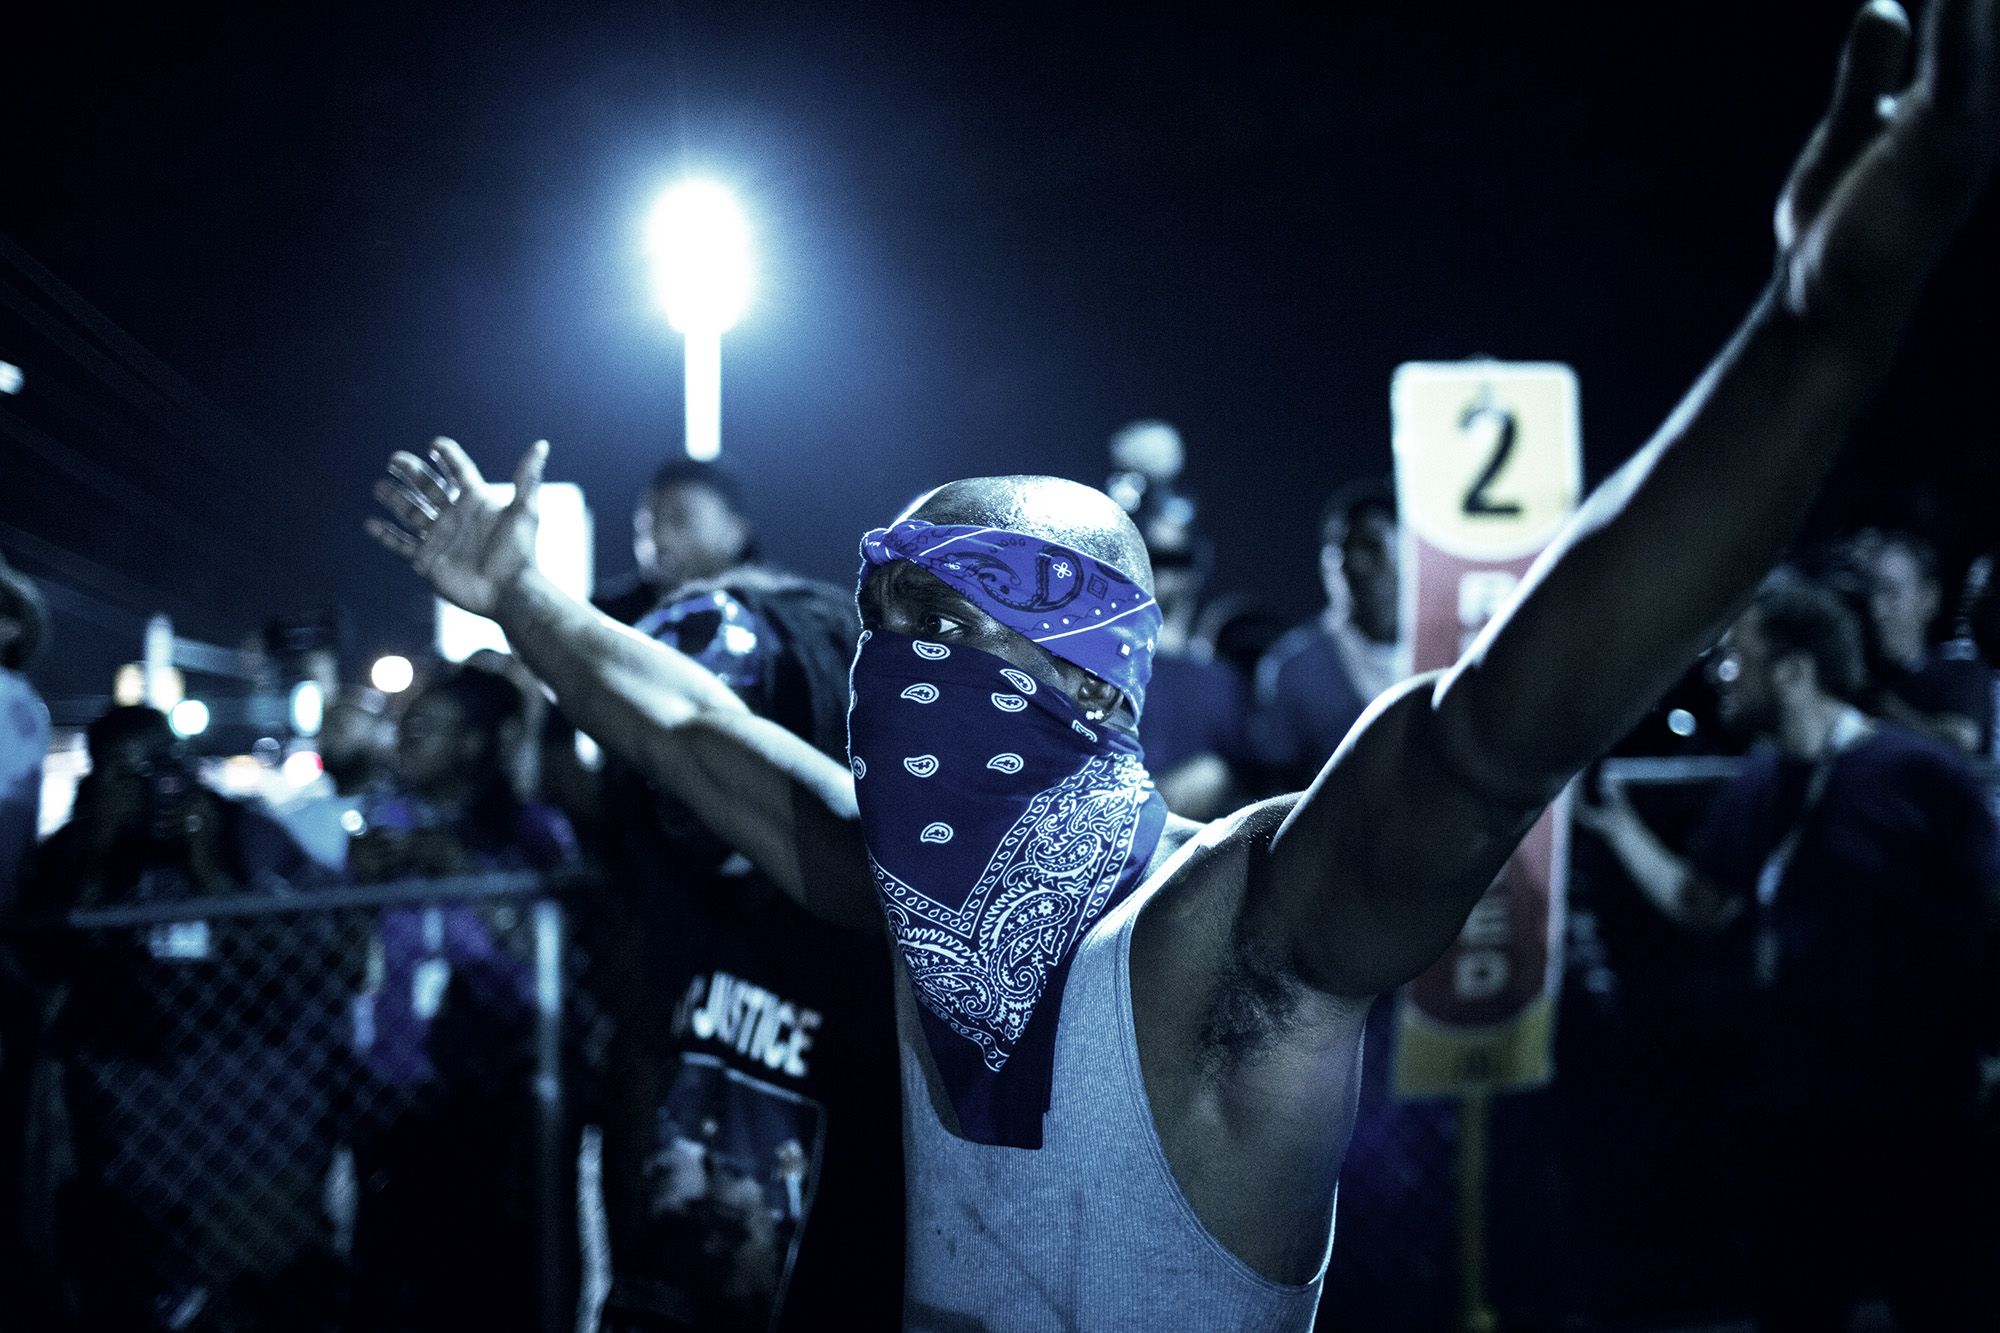 A protestor demonstrates in Ferguson, Mo. on Aug. 19, 2014. (Andrew Cutraro—REDUX for TIME)